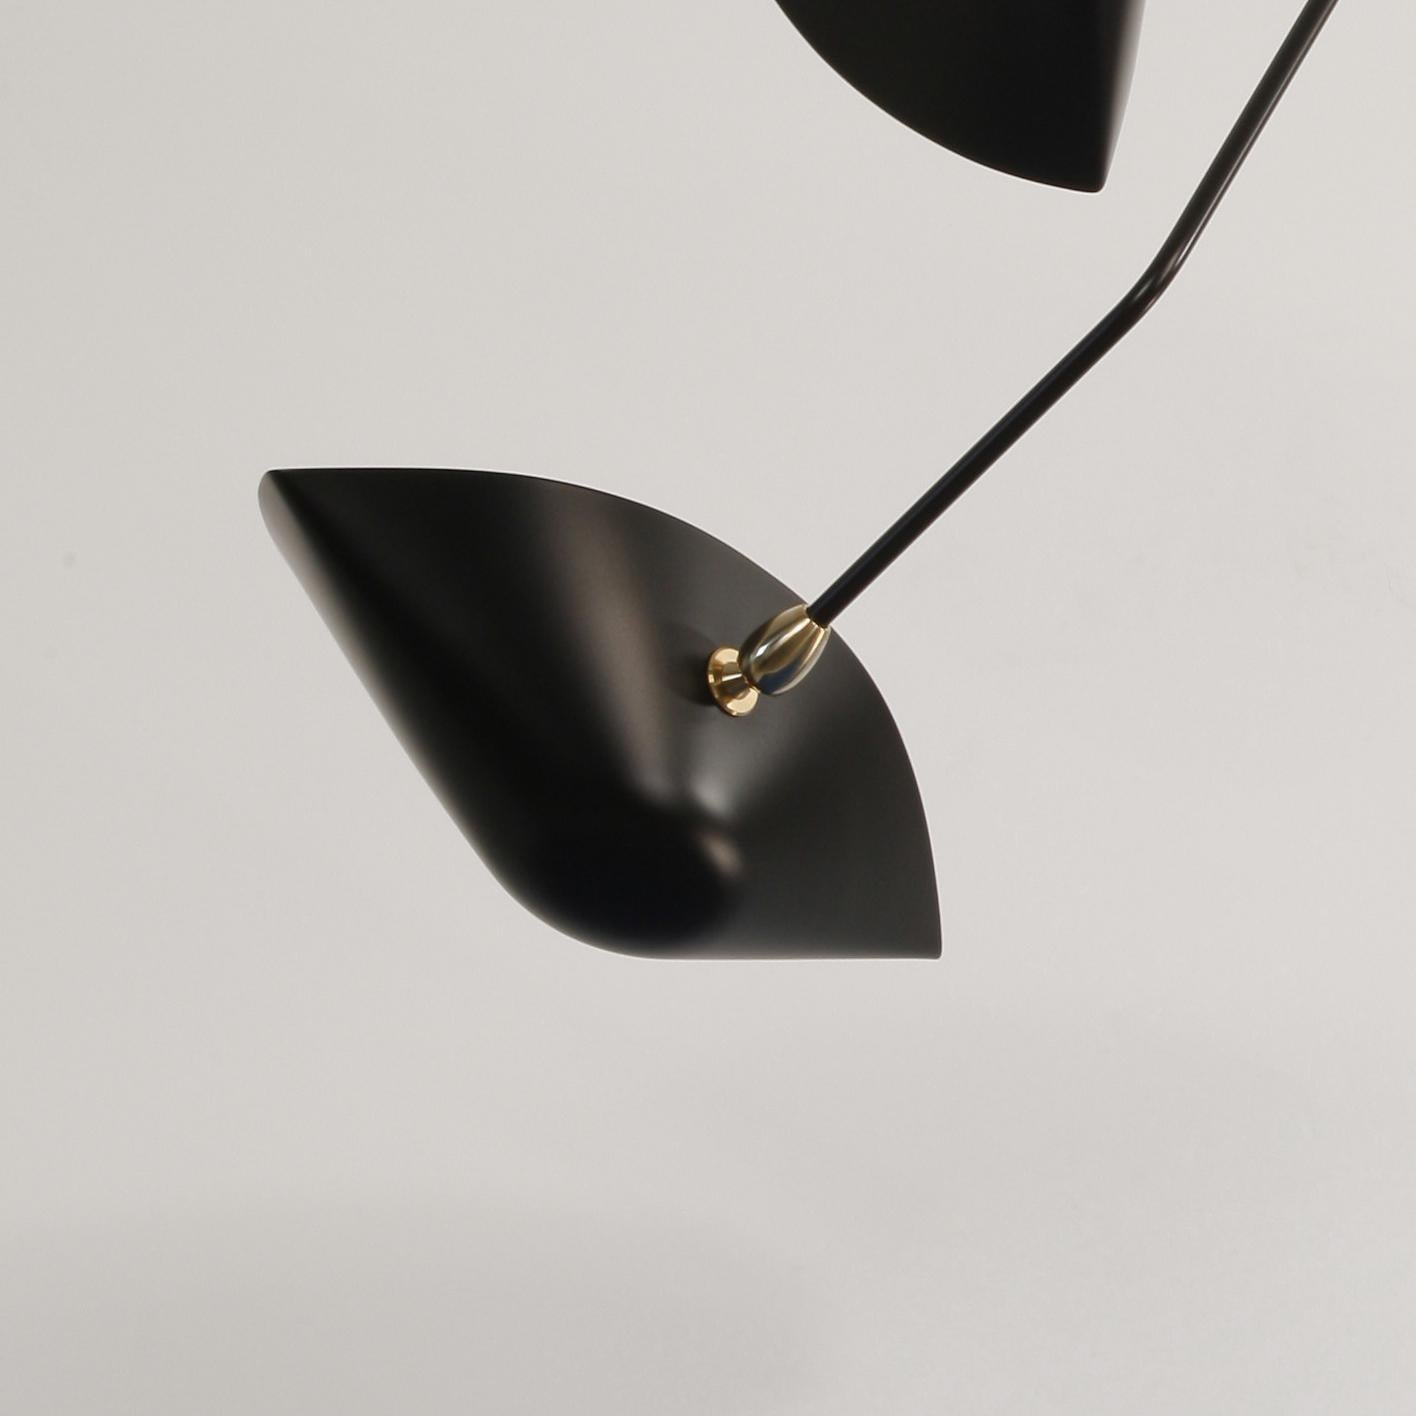 Contemporary Serge Mouille Modern Black Five Curved Fixed Arms Spider Ceiling Lamp